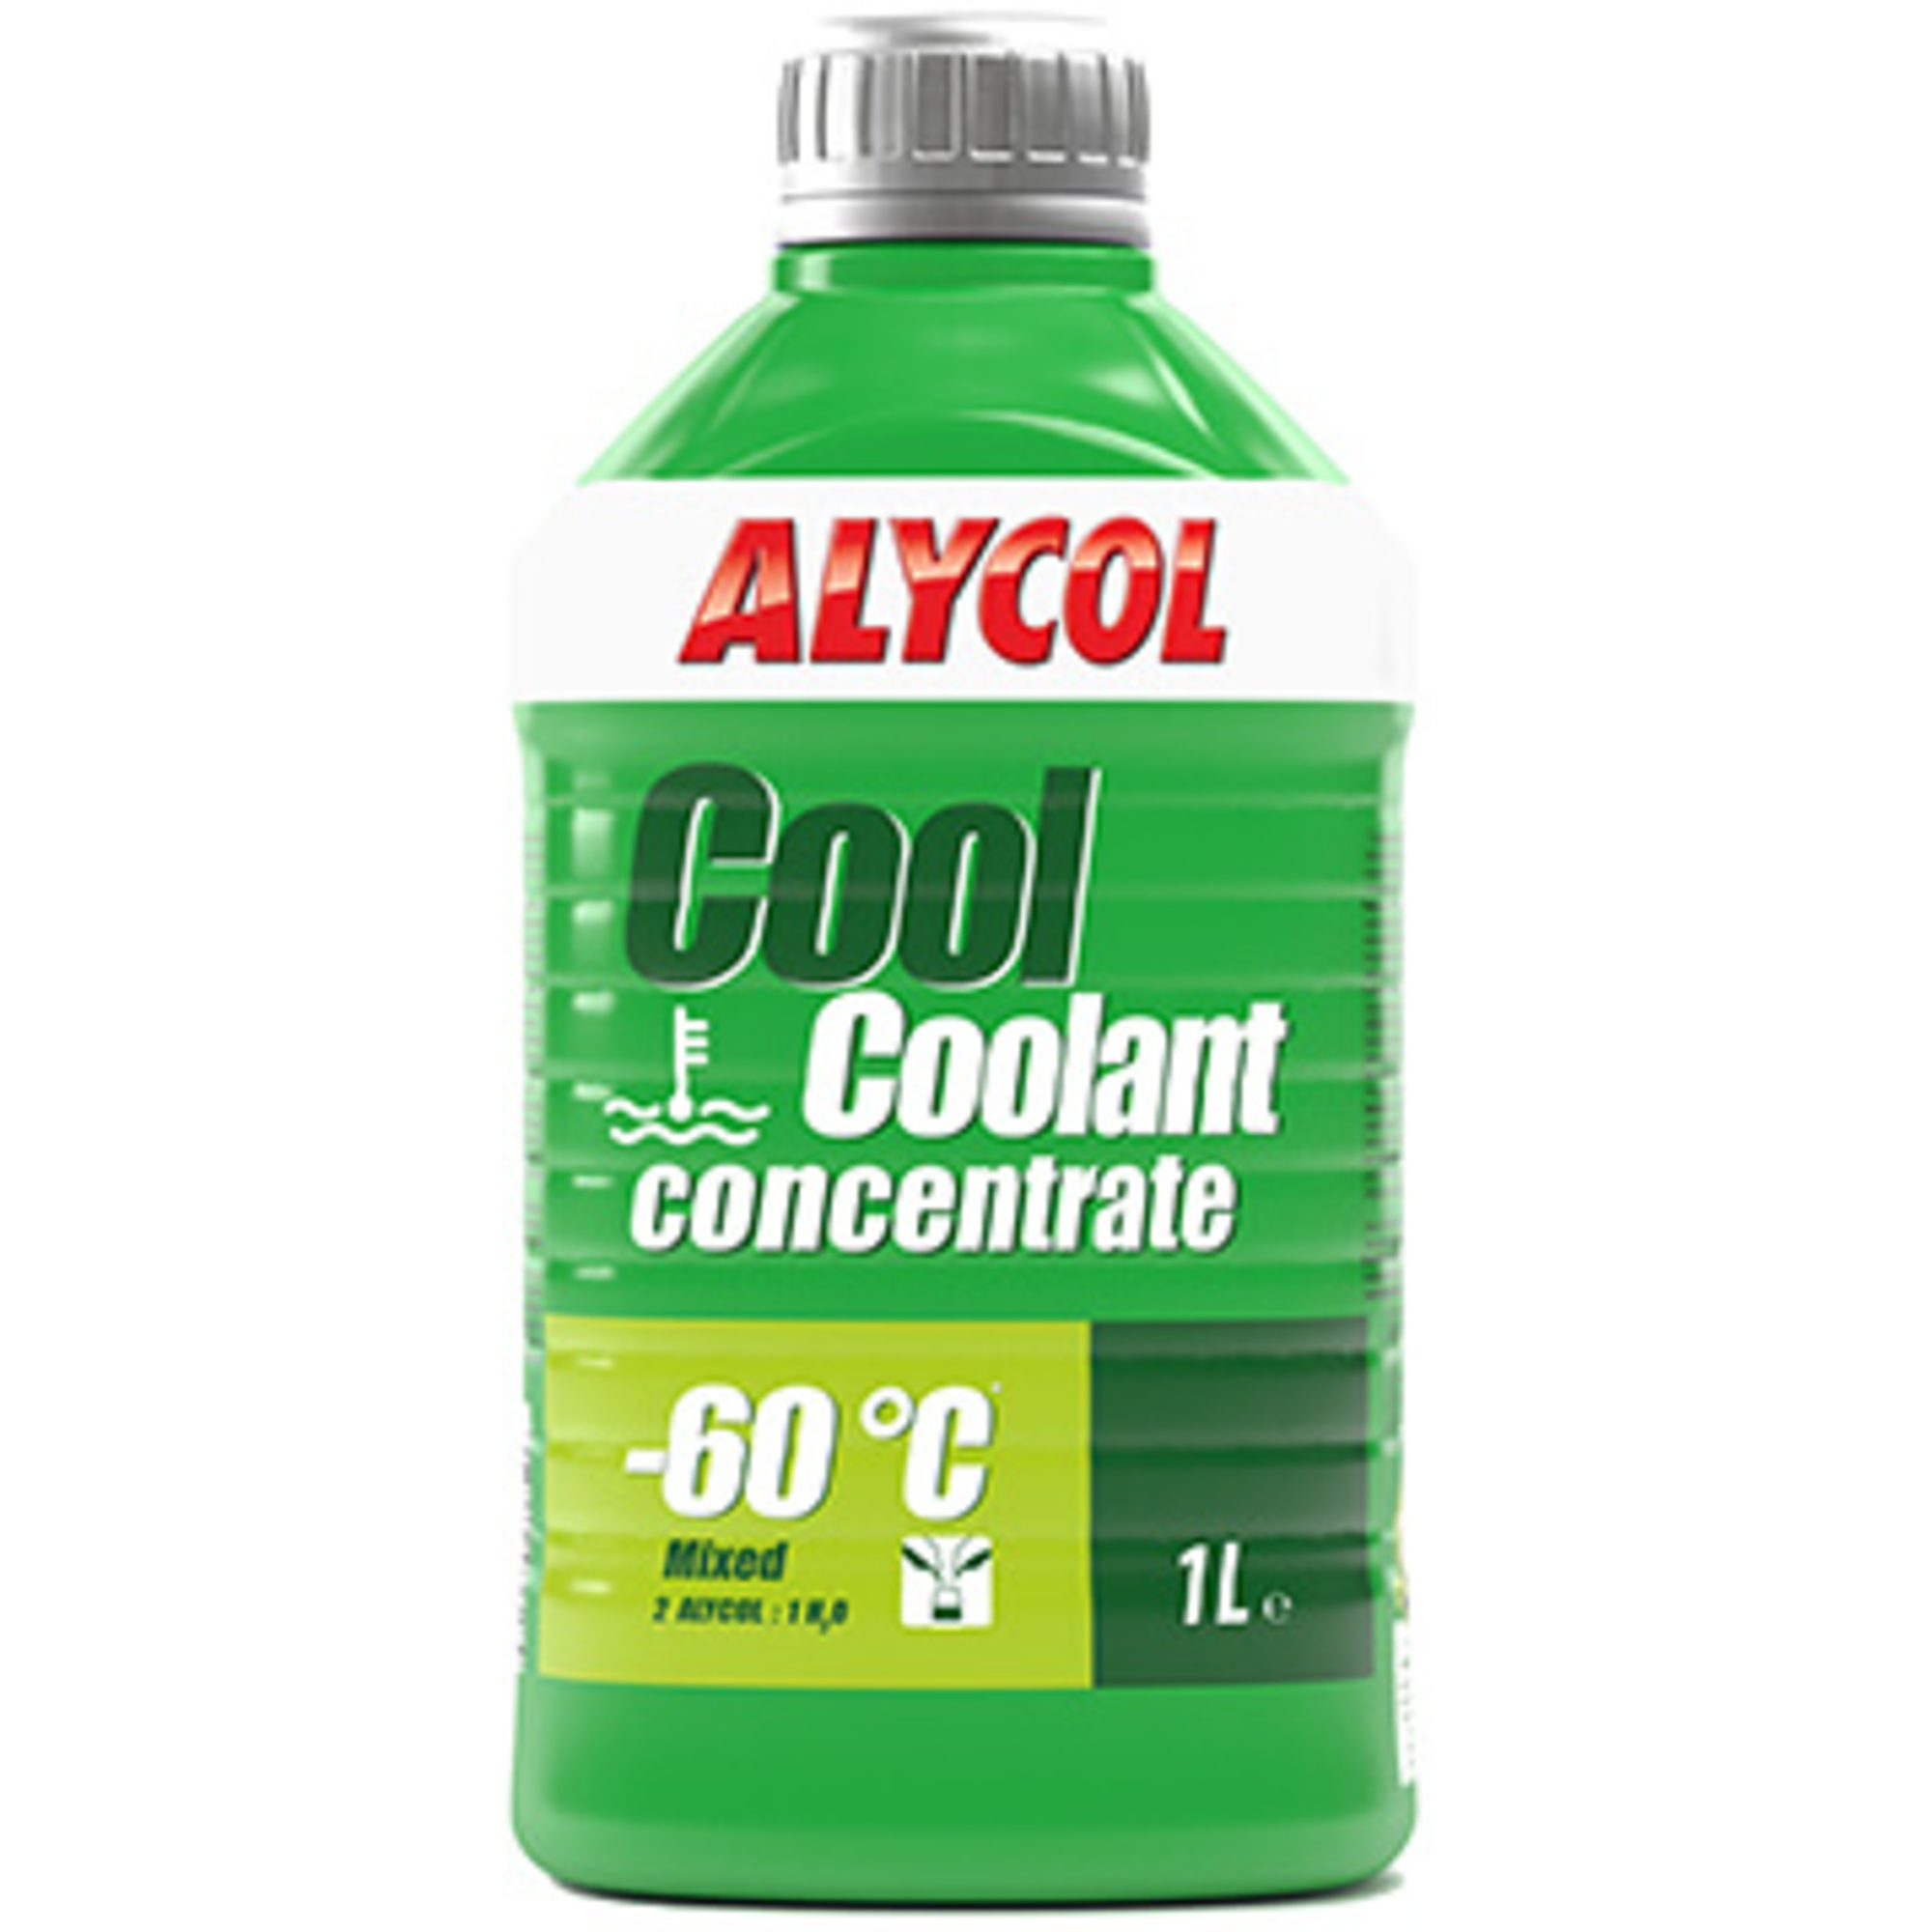 Alycol Cool concentrate 65KG 19002779